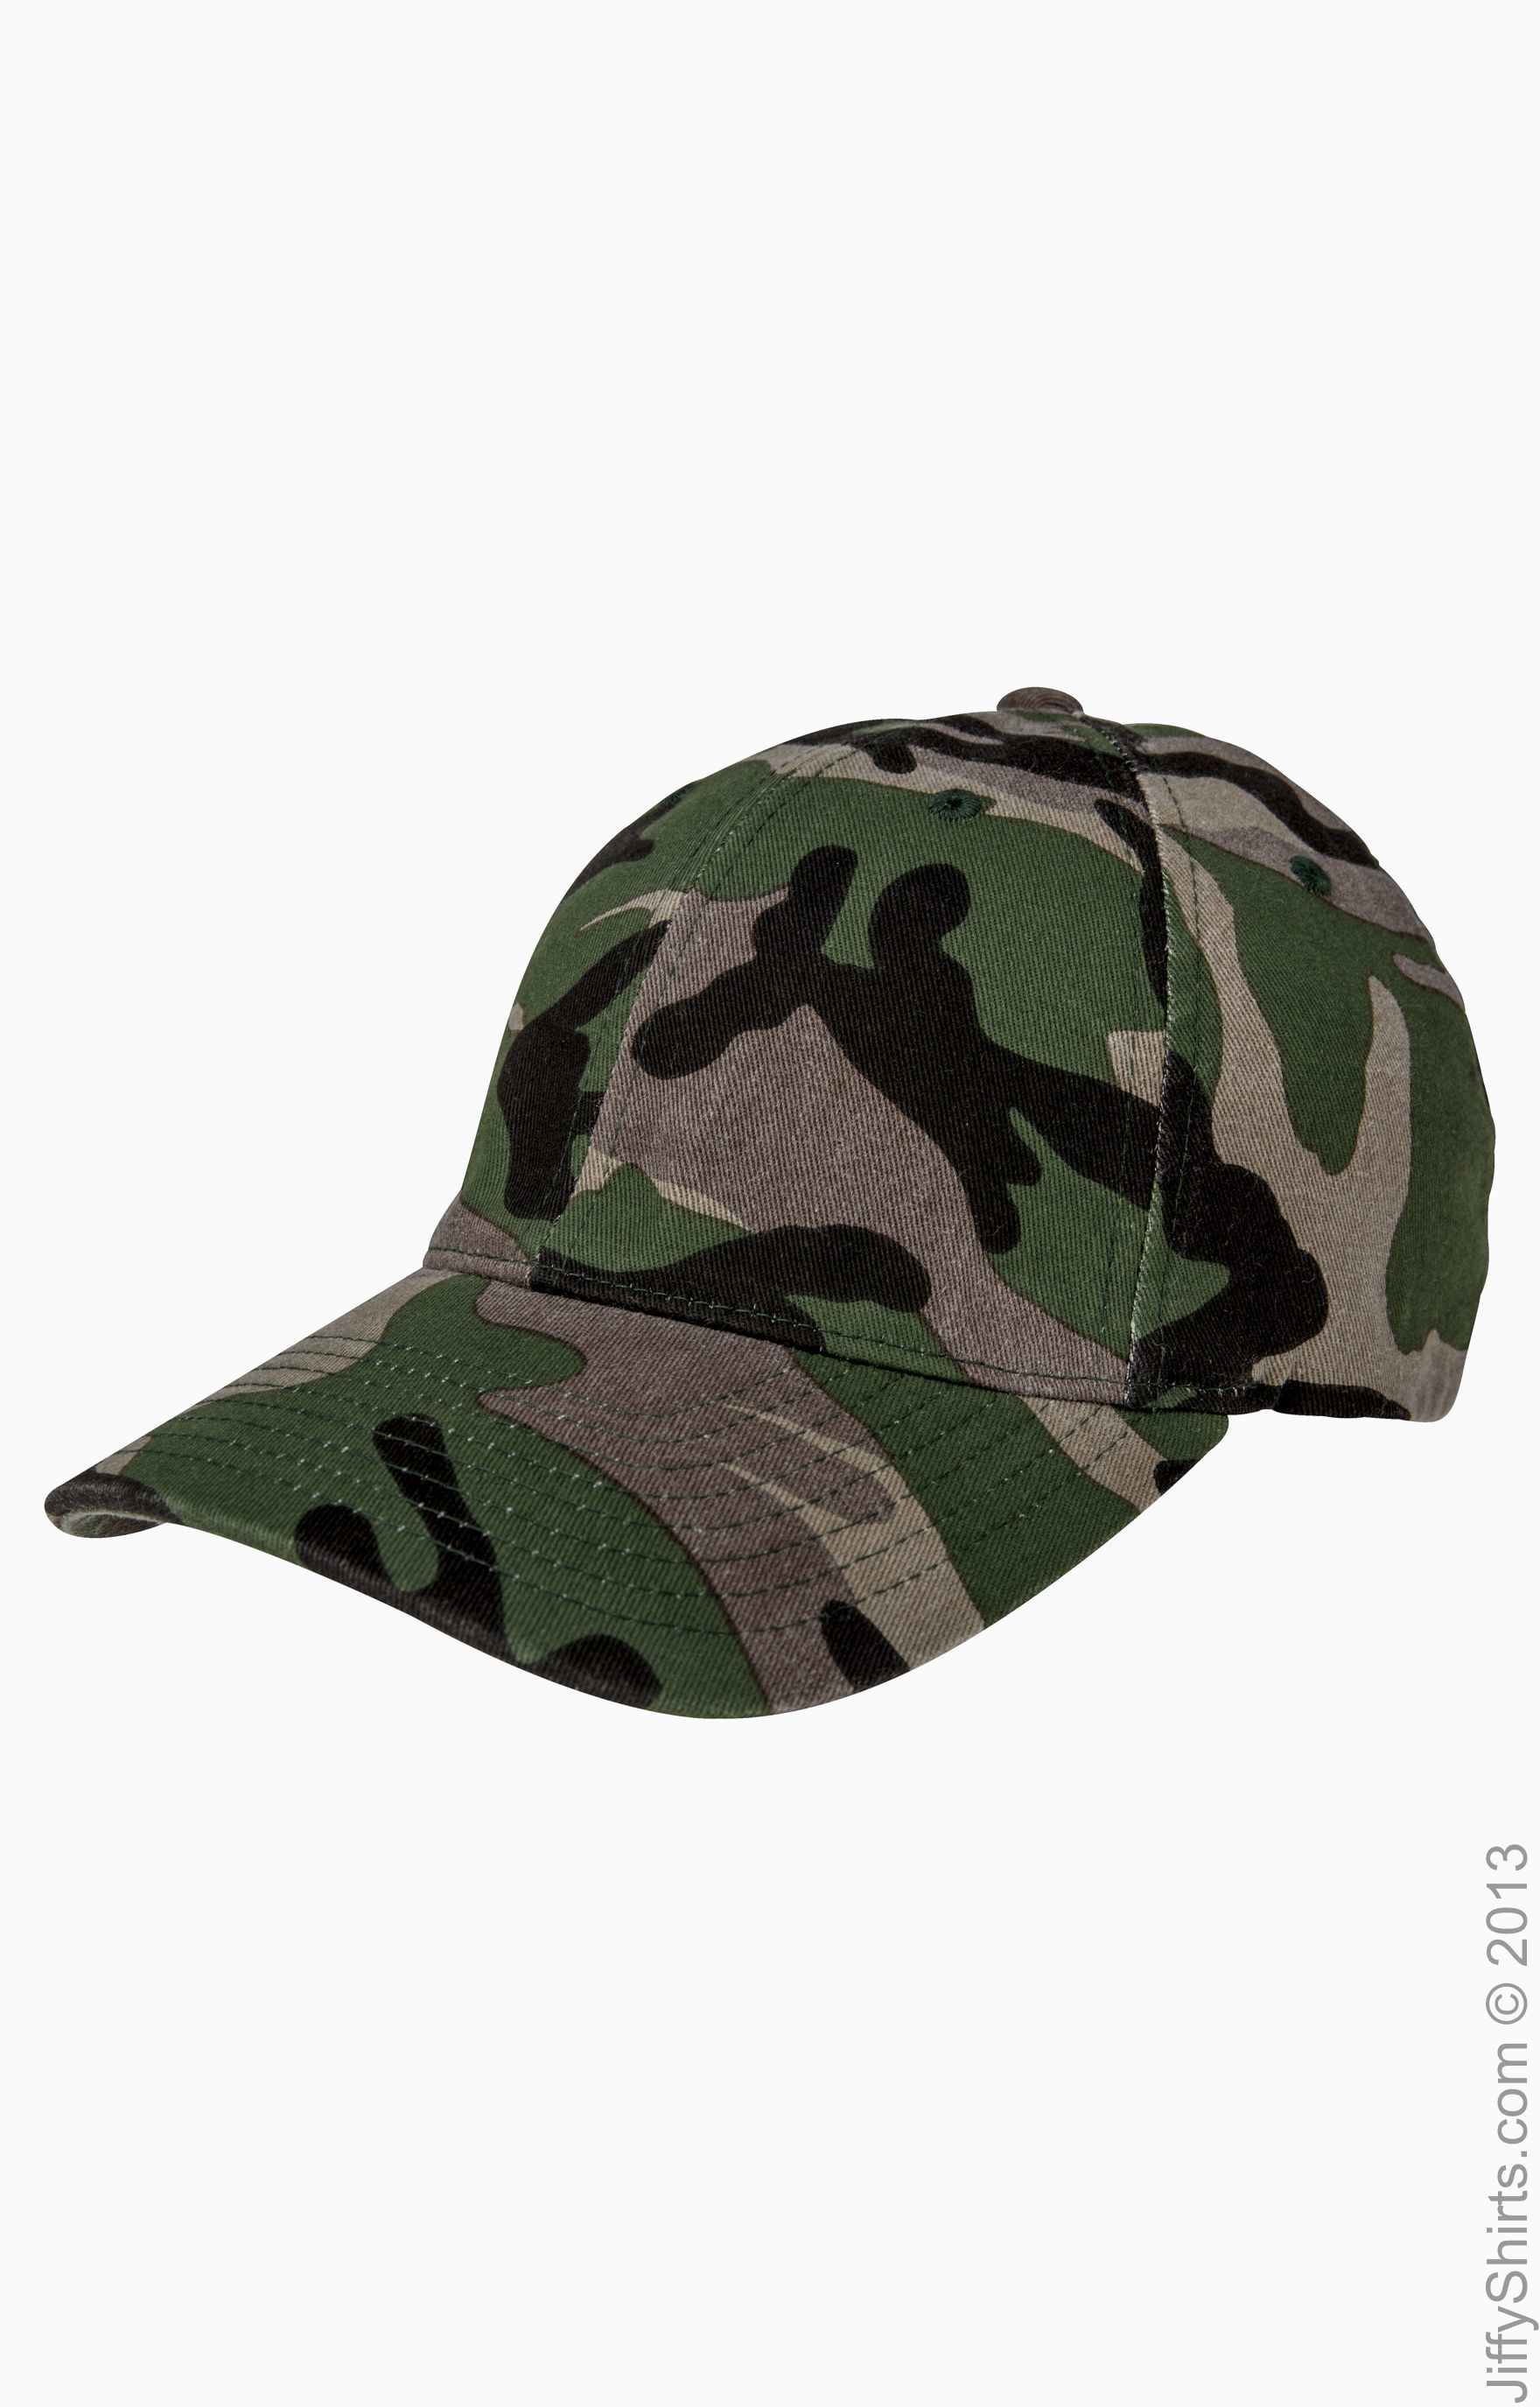 Flexfit Camo Cap Green or Silver Camouflage Fitted Hat 6977CA S/M and L/XL